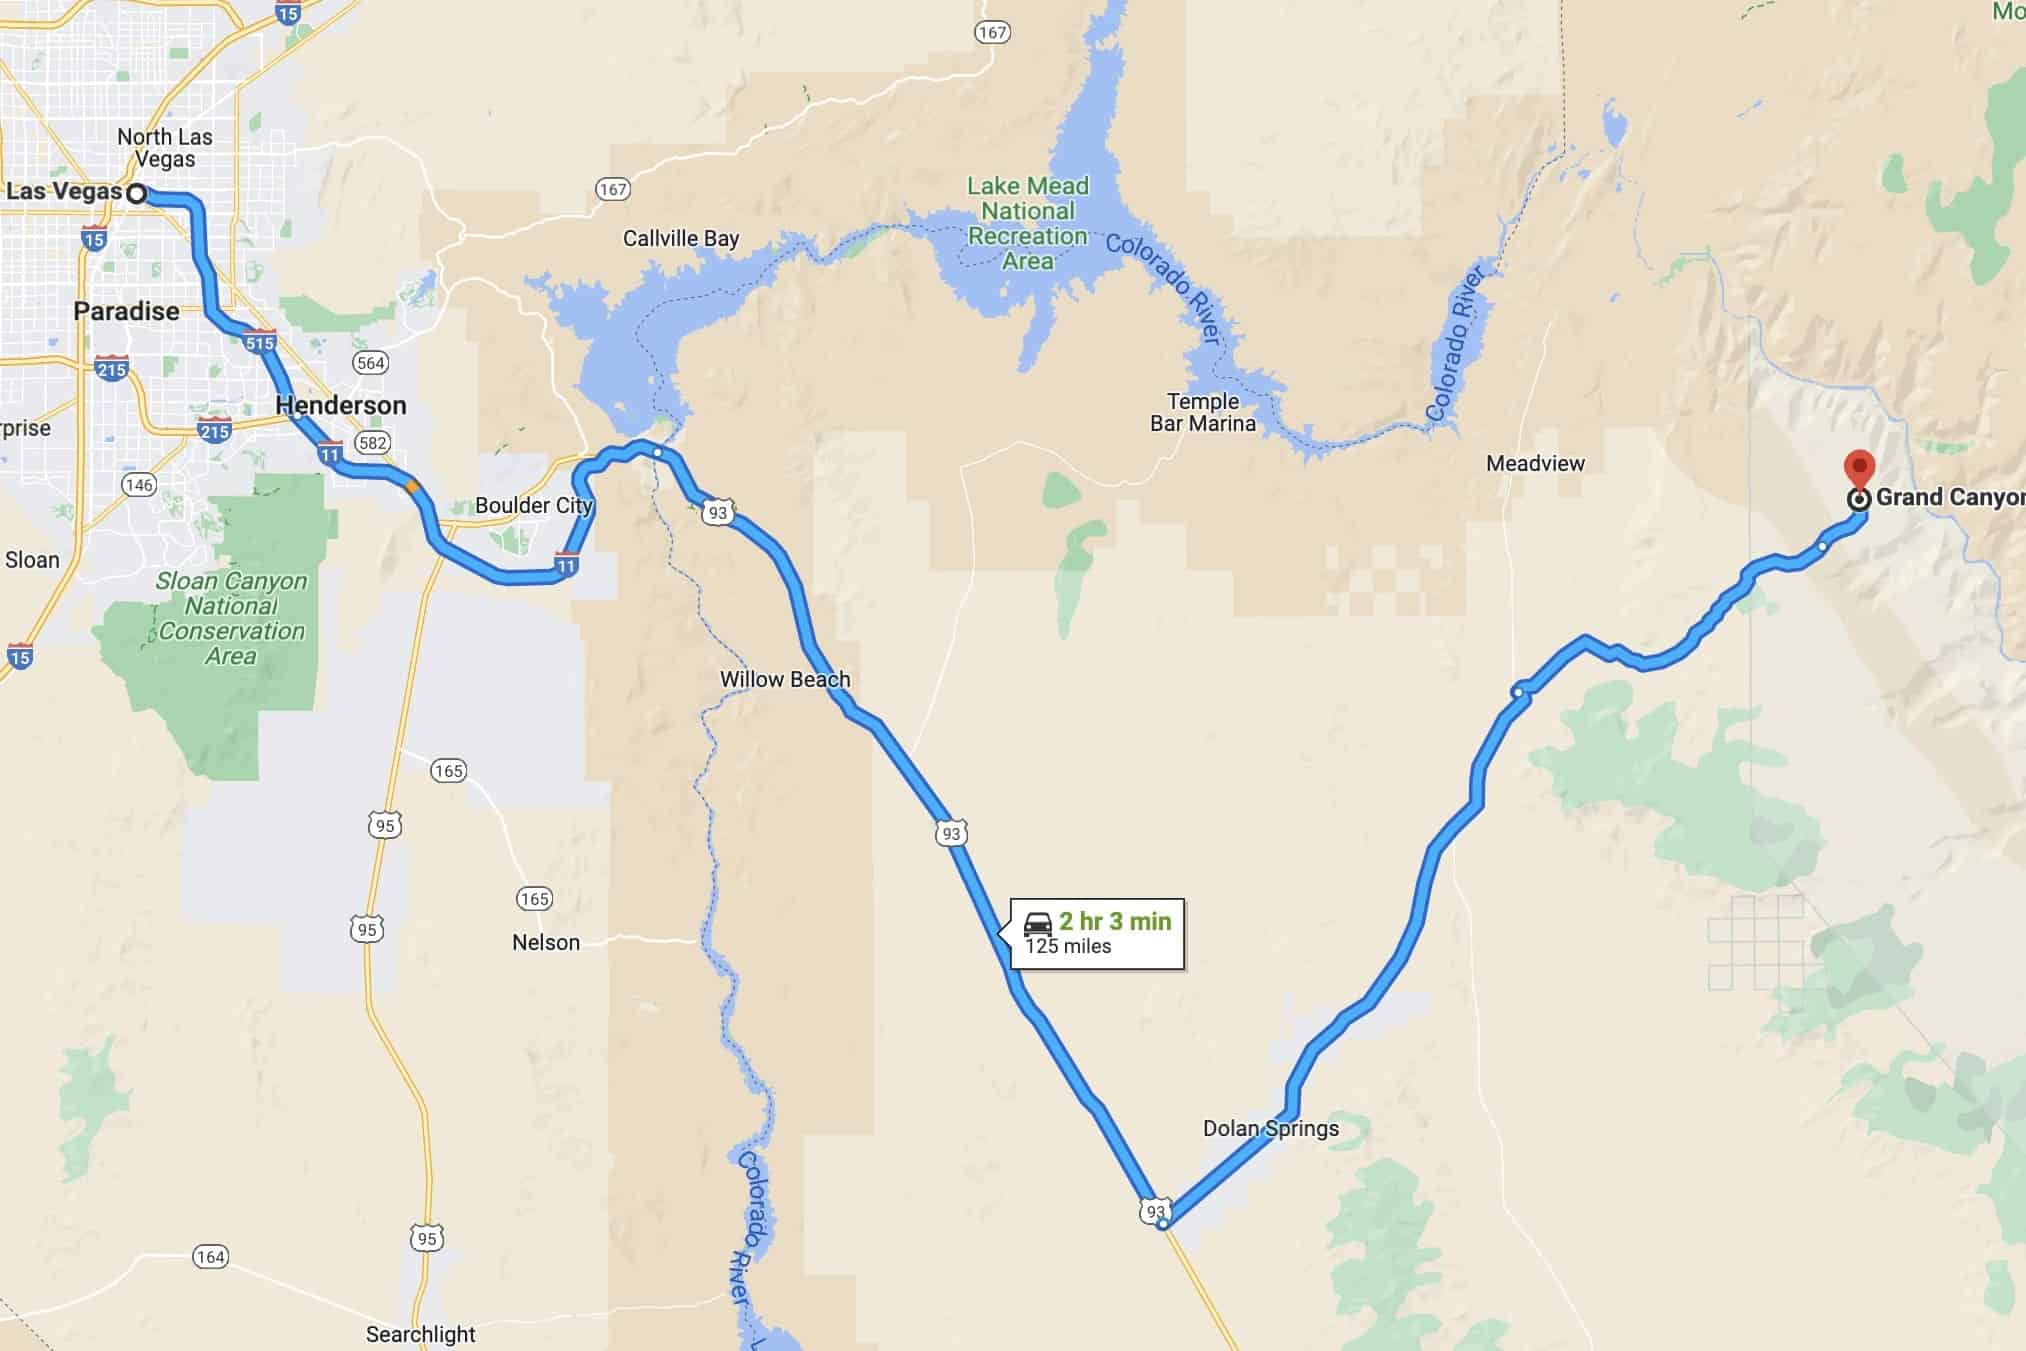 google map of the drive between vegas and grand canyon west rim